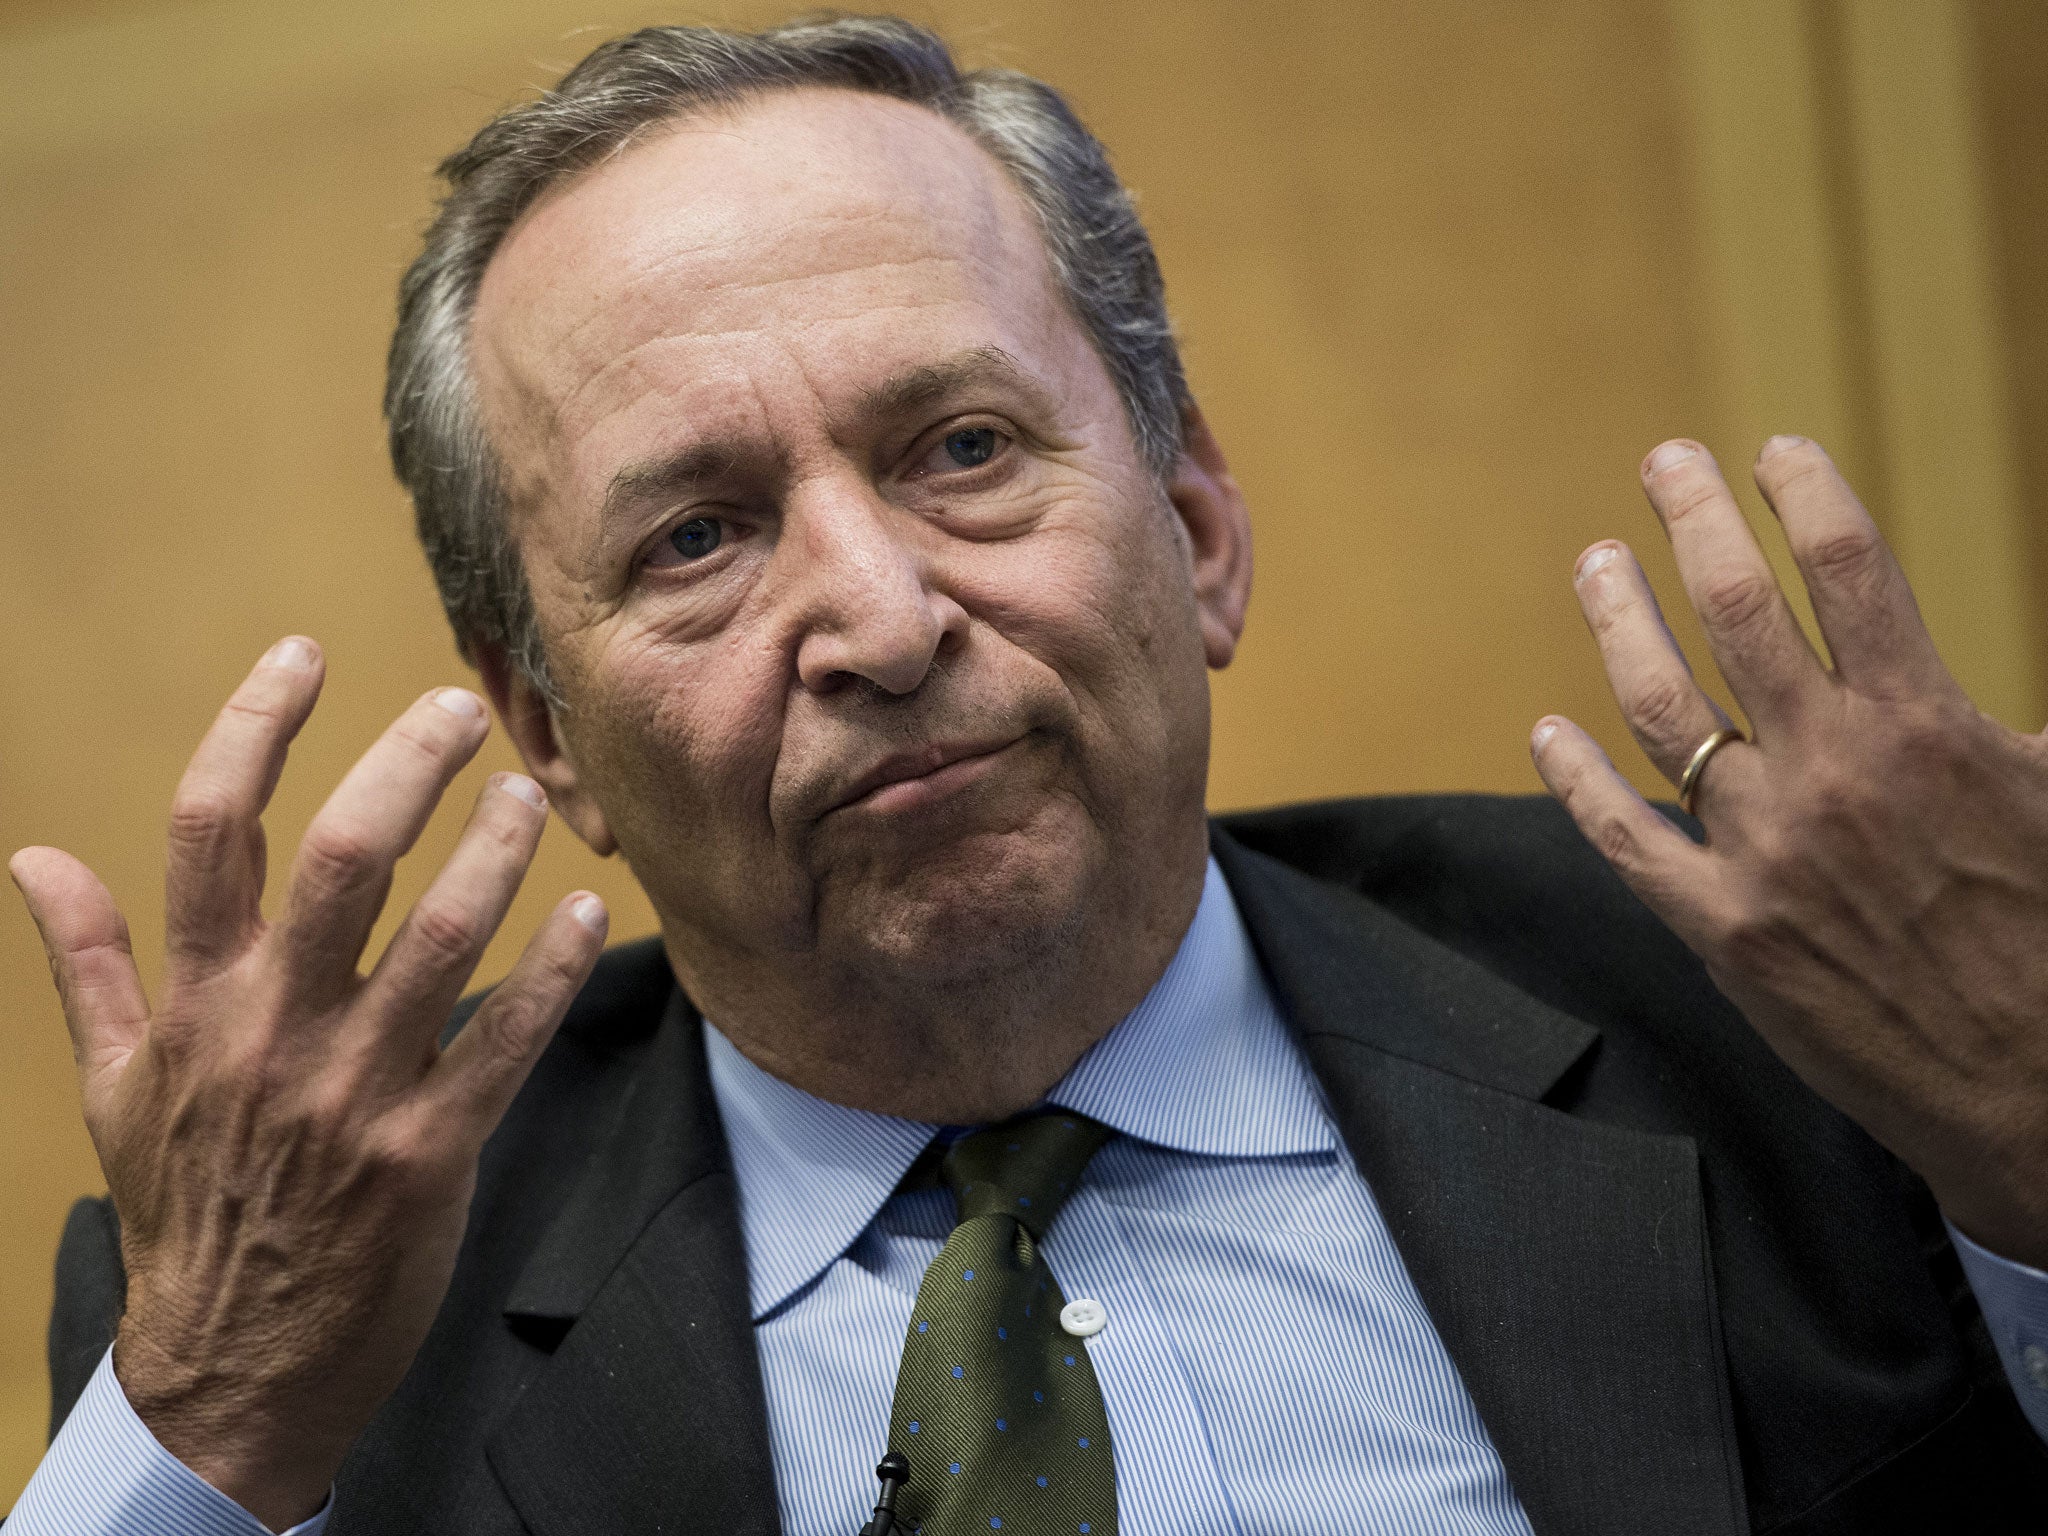 Lawrence H. Summers said that governments and donors could create 'a grand convergence' and prevent 10 million avoidable deaths per year by 2035